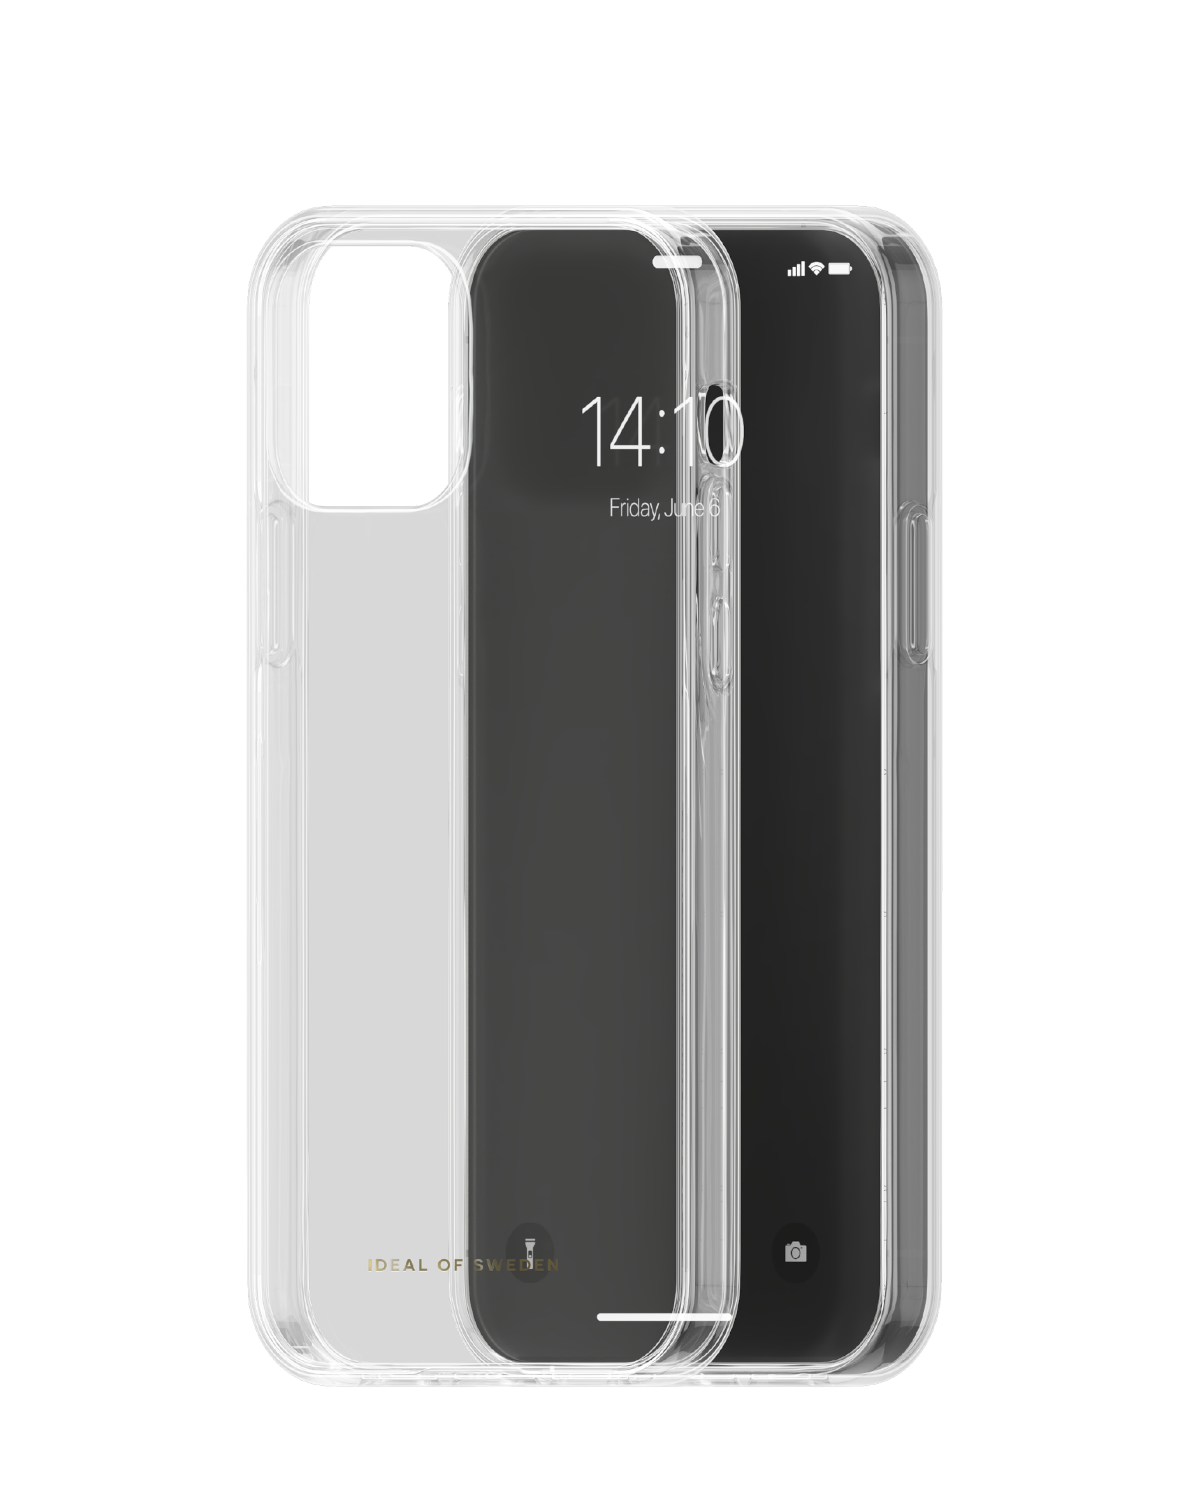 iPhone 12 12 Pro iDeal Clear Case Clear